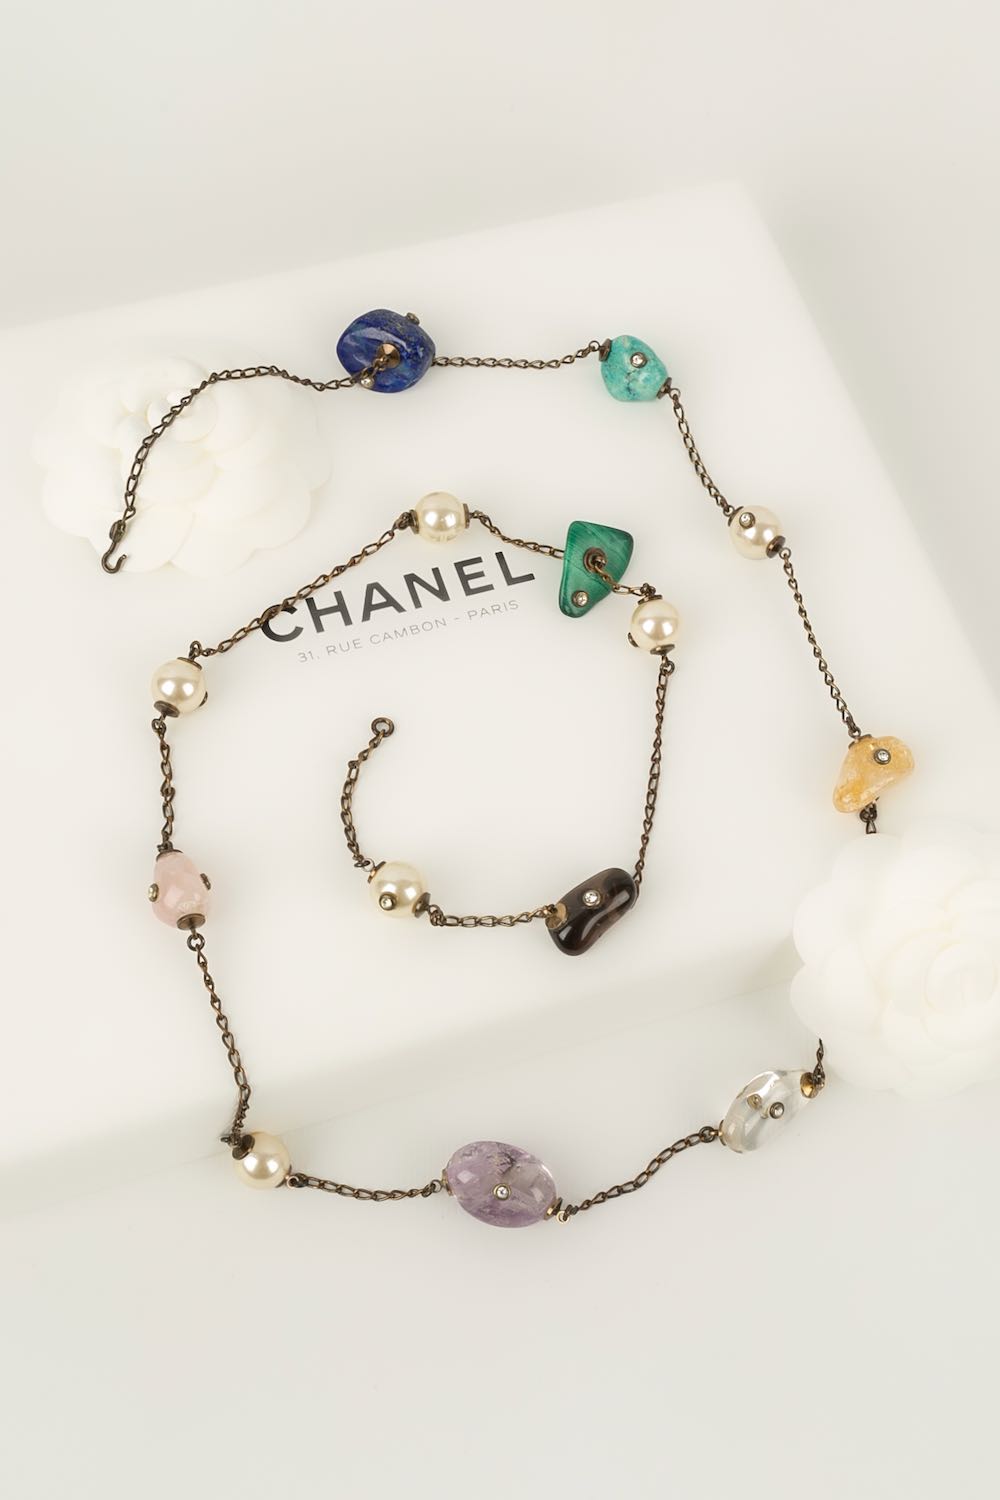 Collier Chanel Automne 1997